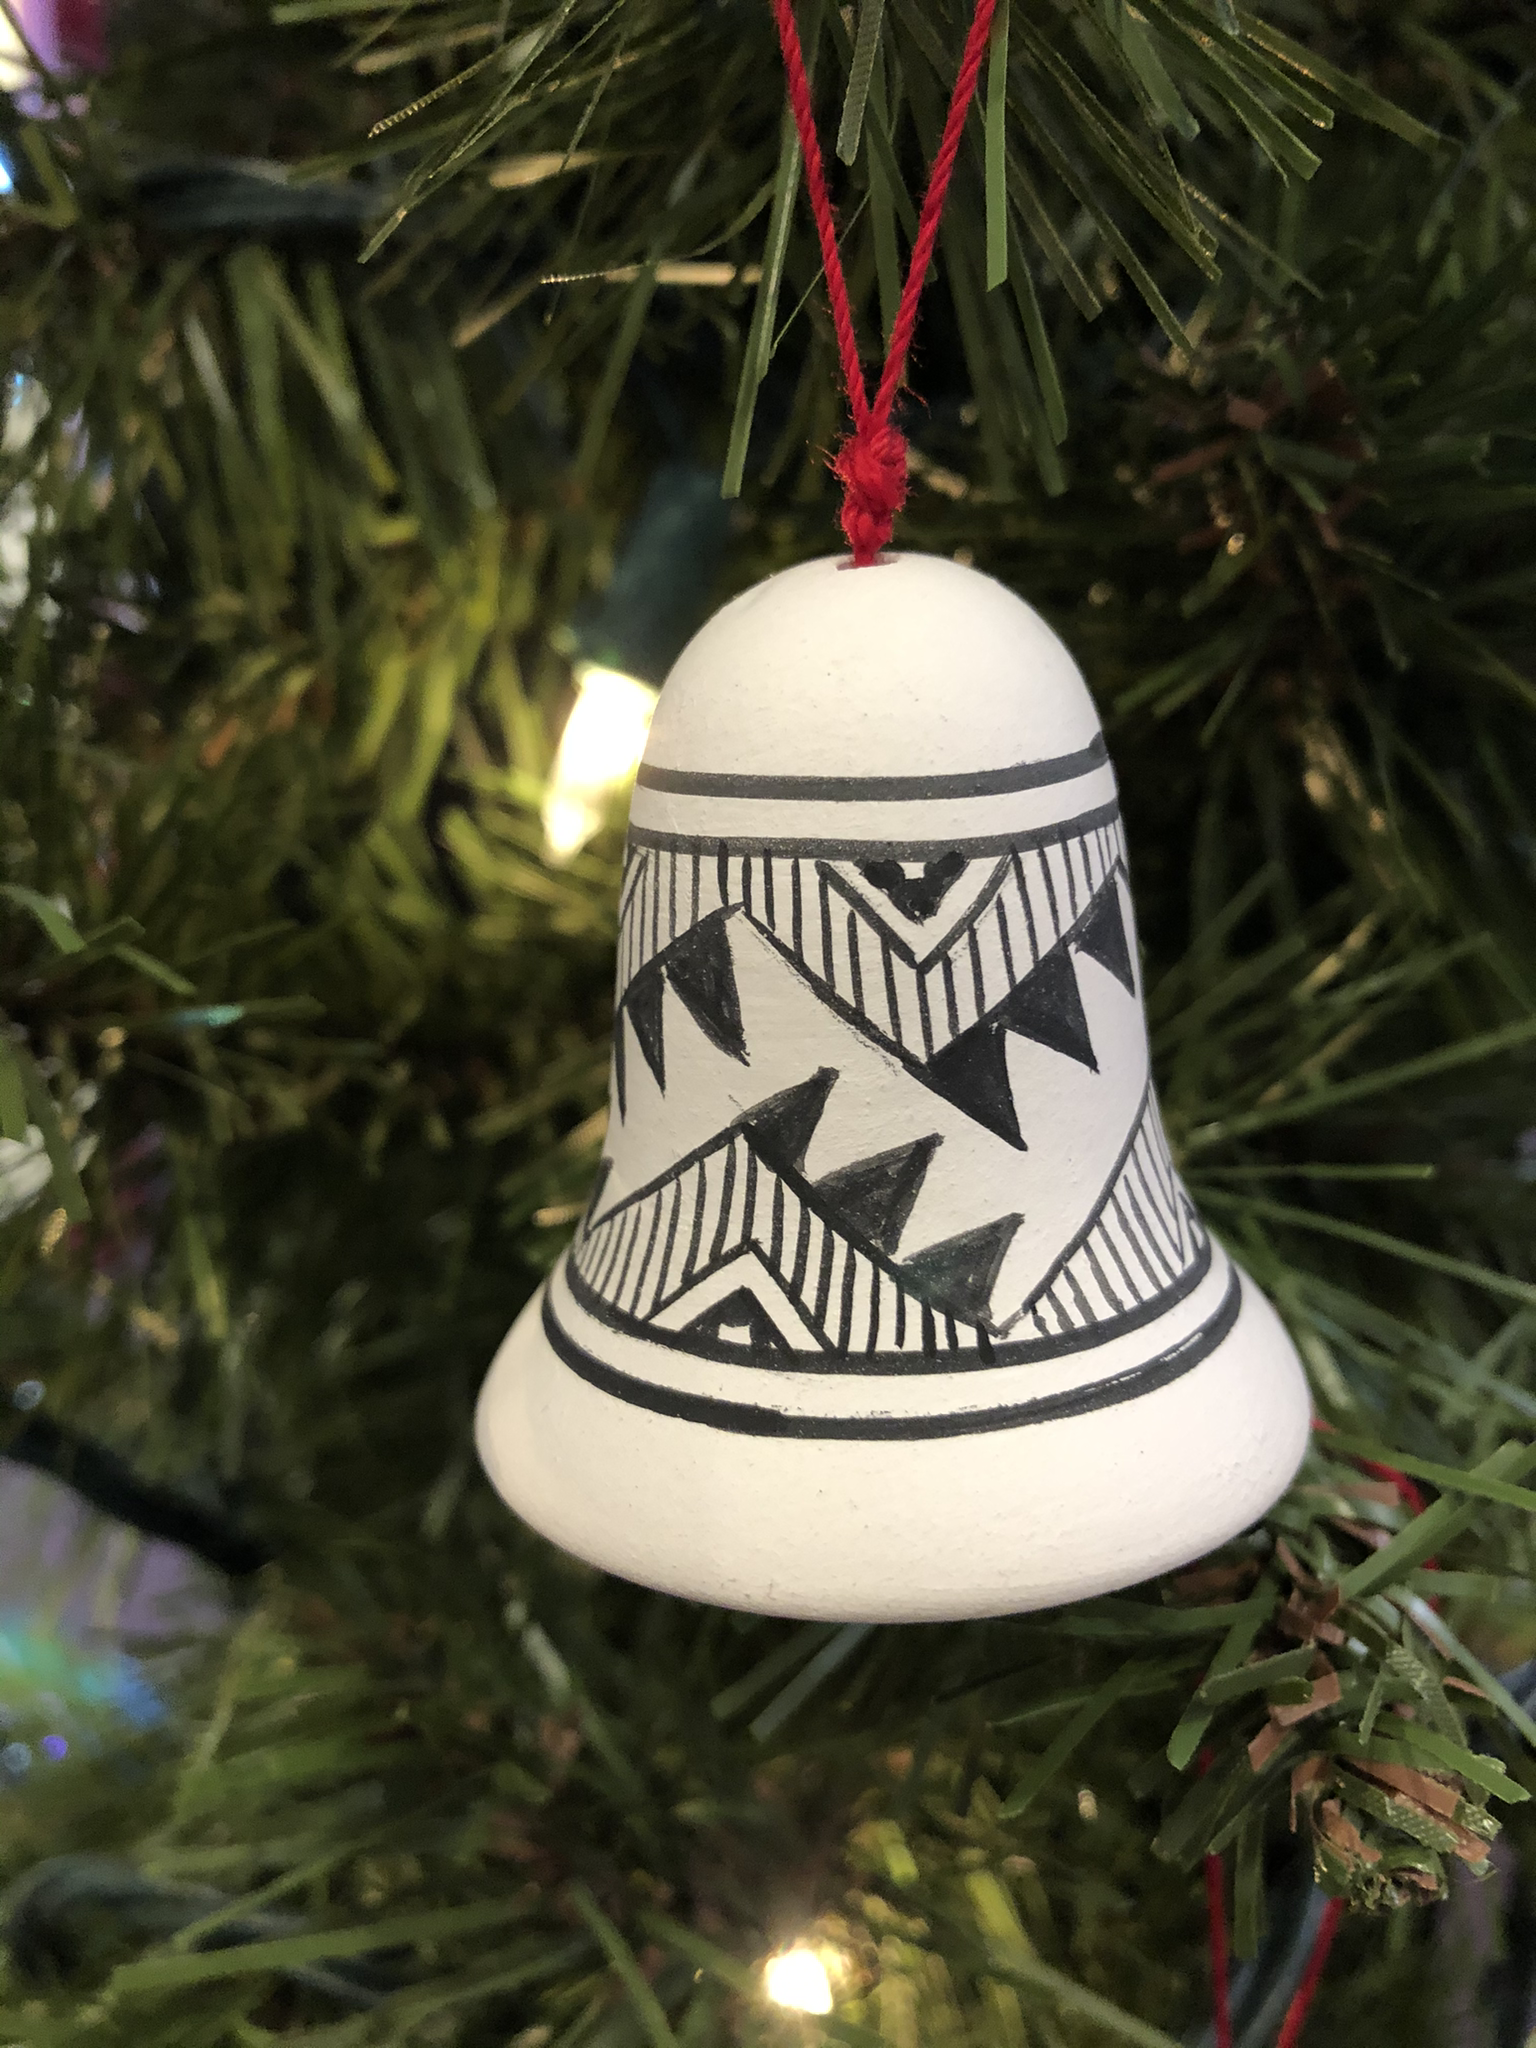 THE SHOP - A Christmas Store | Ornaments by New Mexico Artists + -